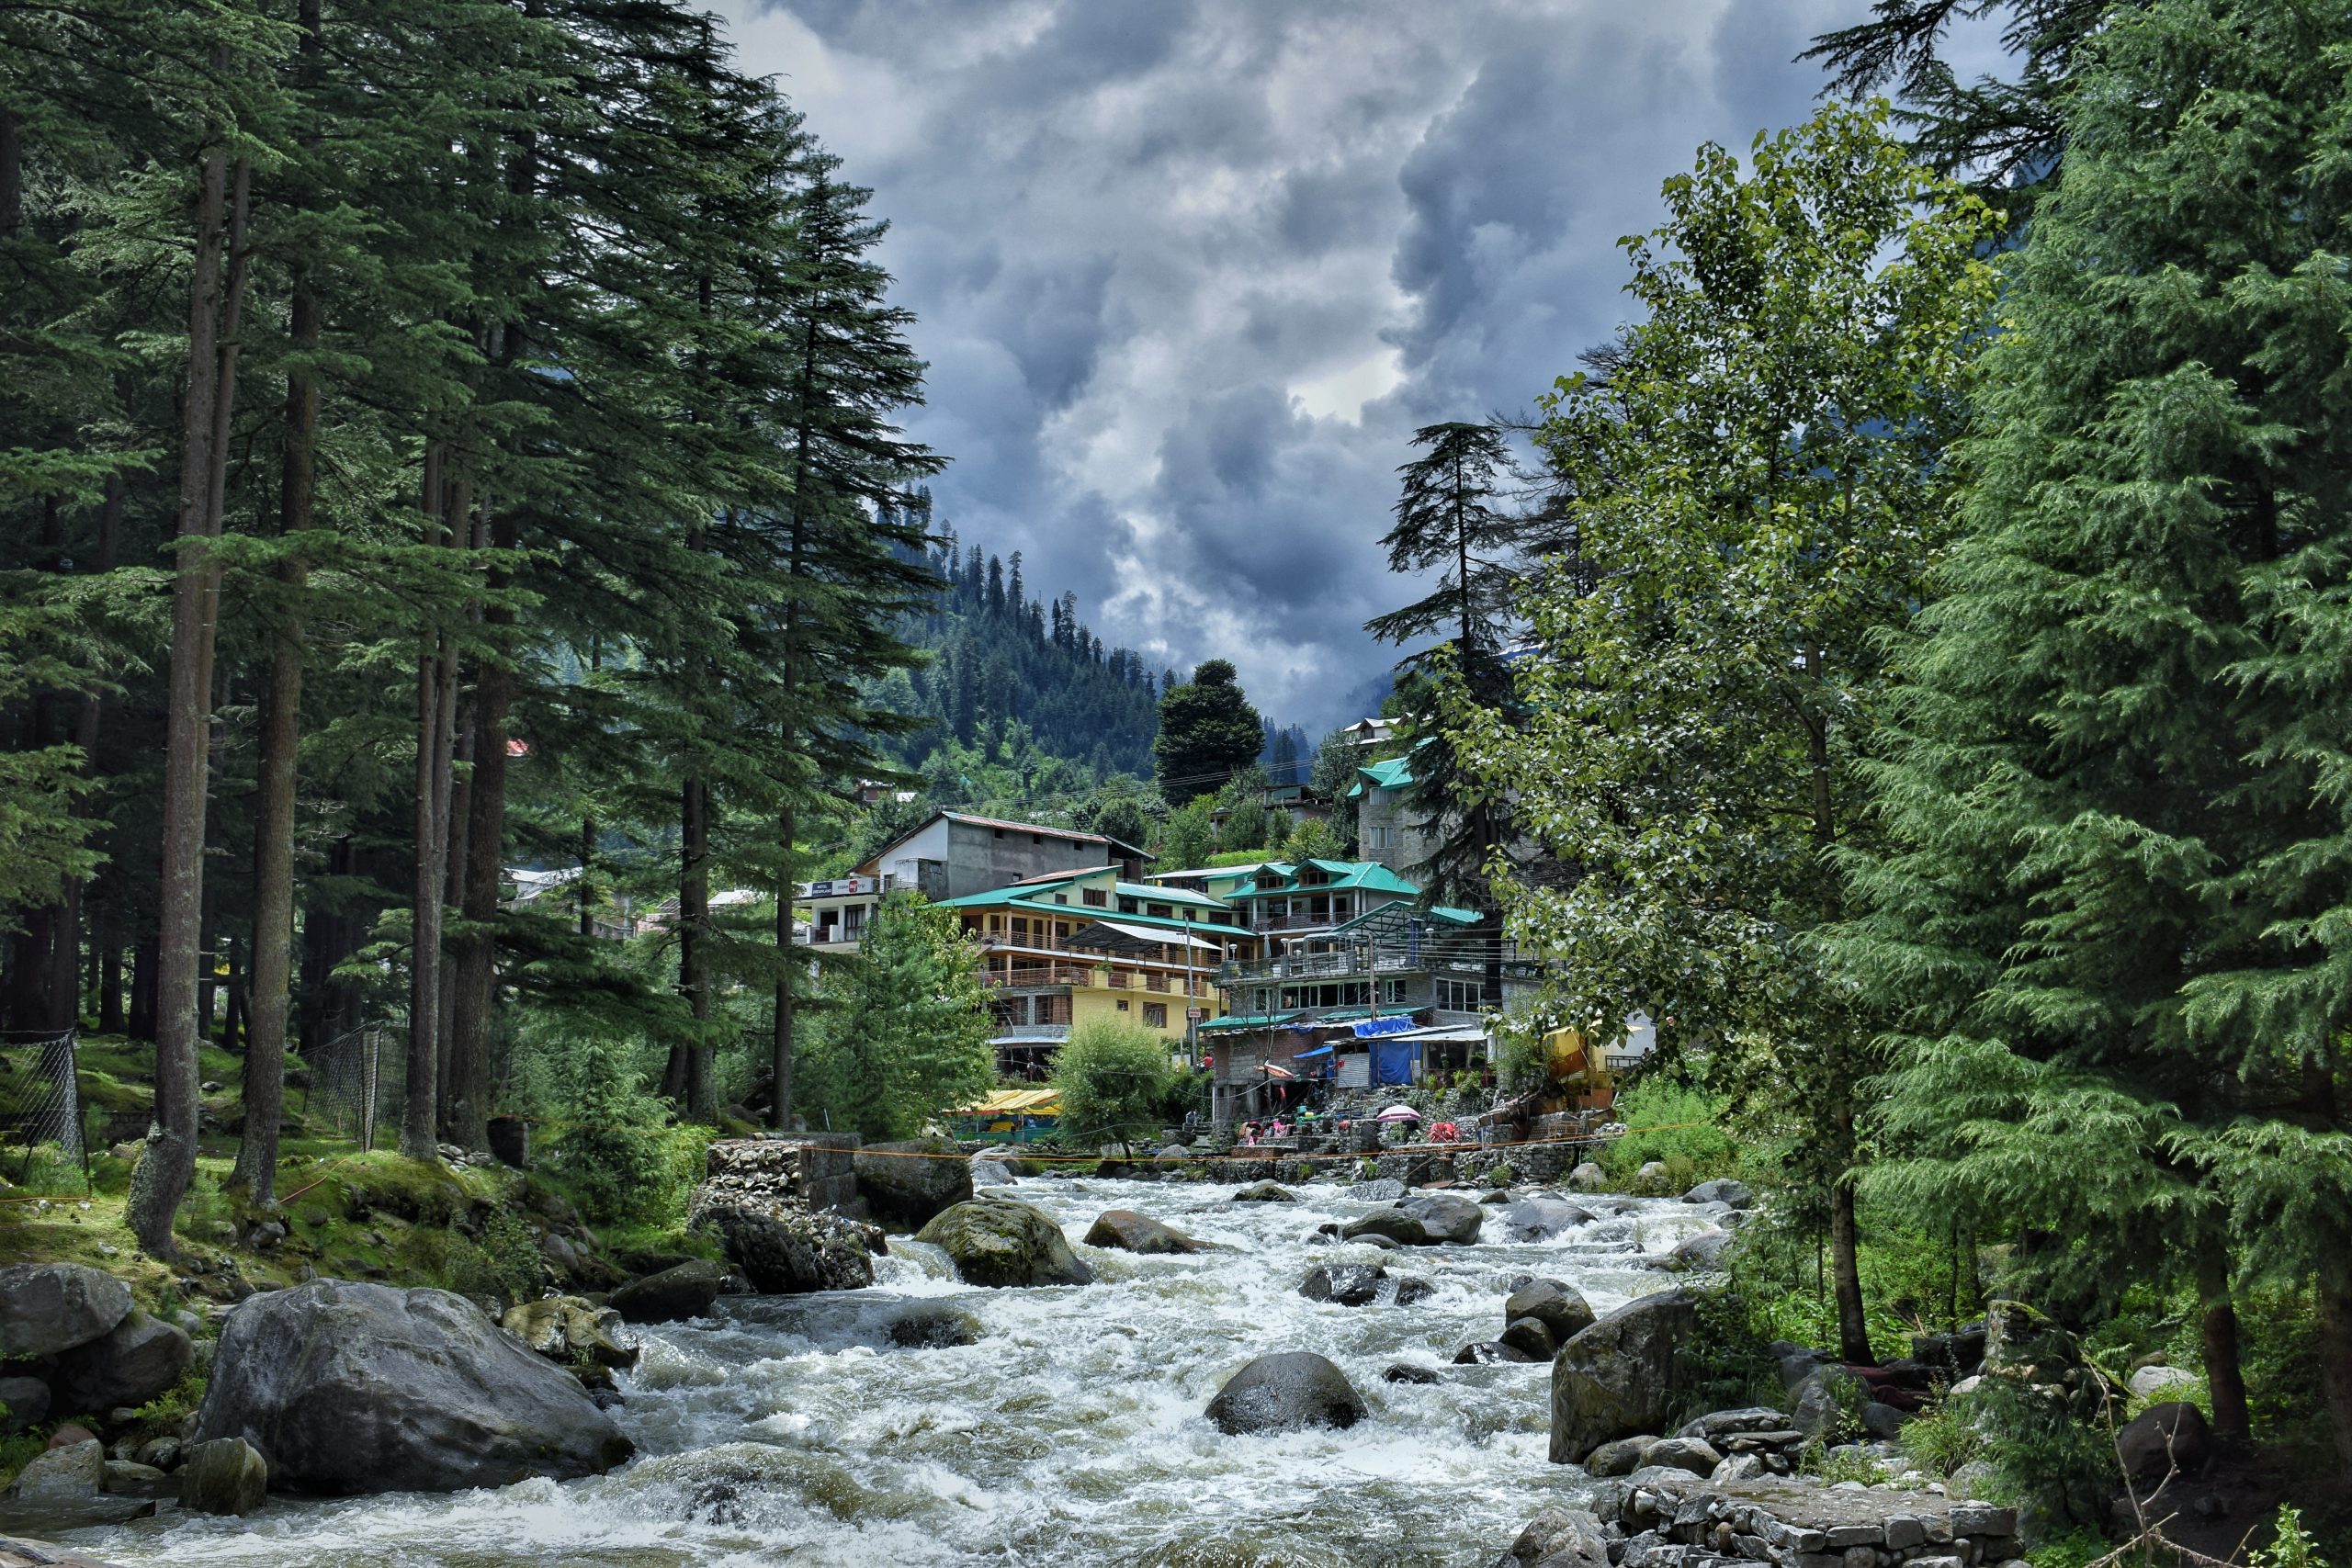 Parvati River flowing through the valley.